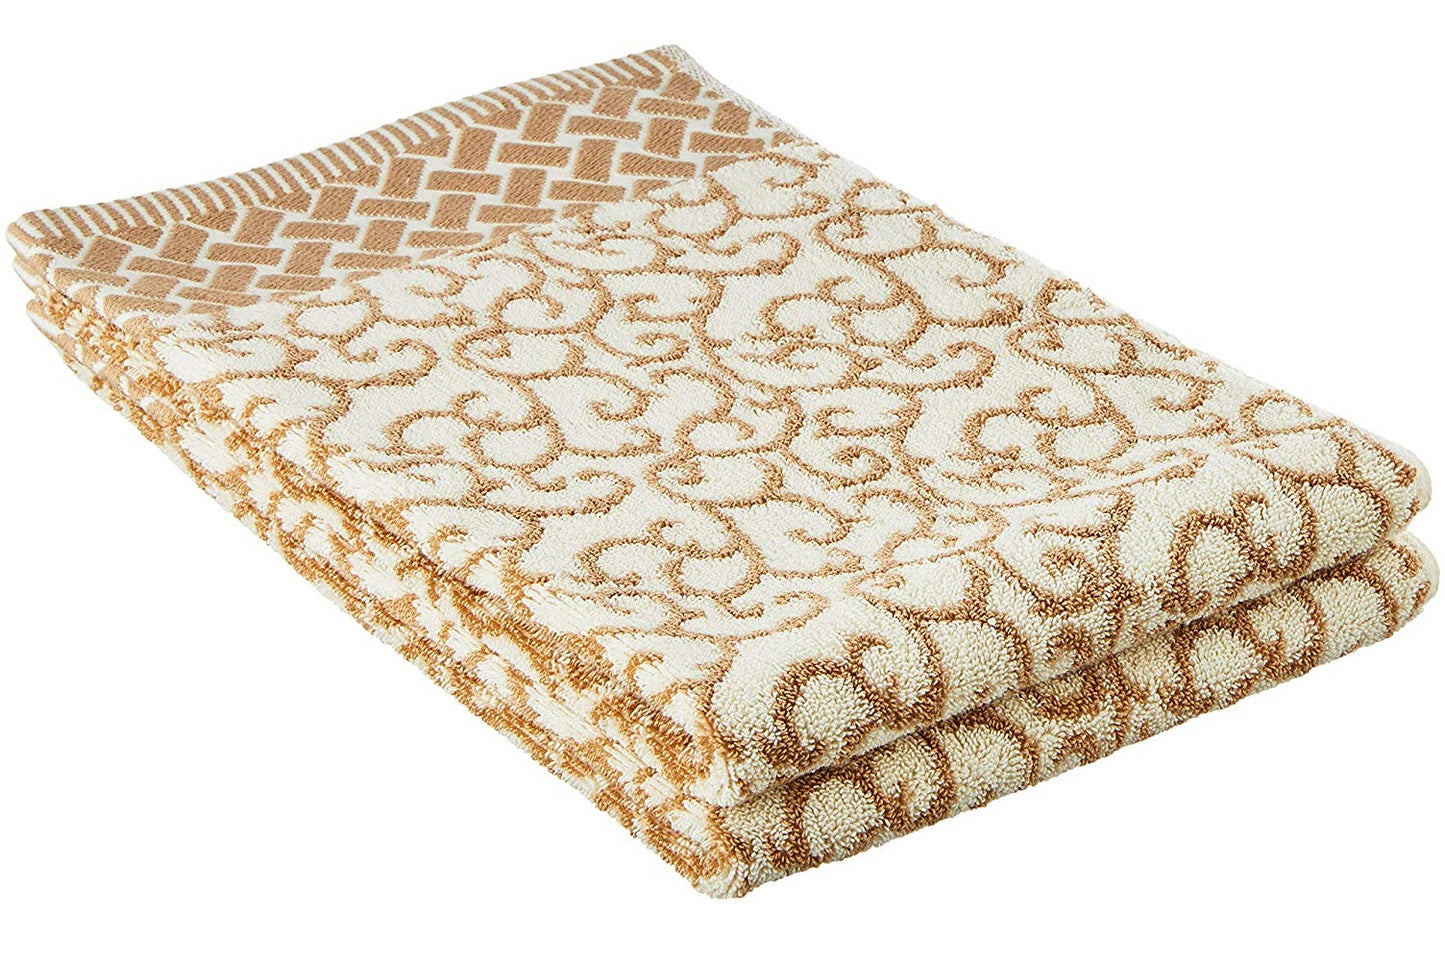 Swirl Taupe, Hand Towels - Set of 2